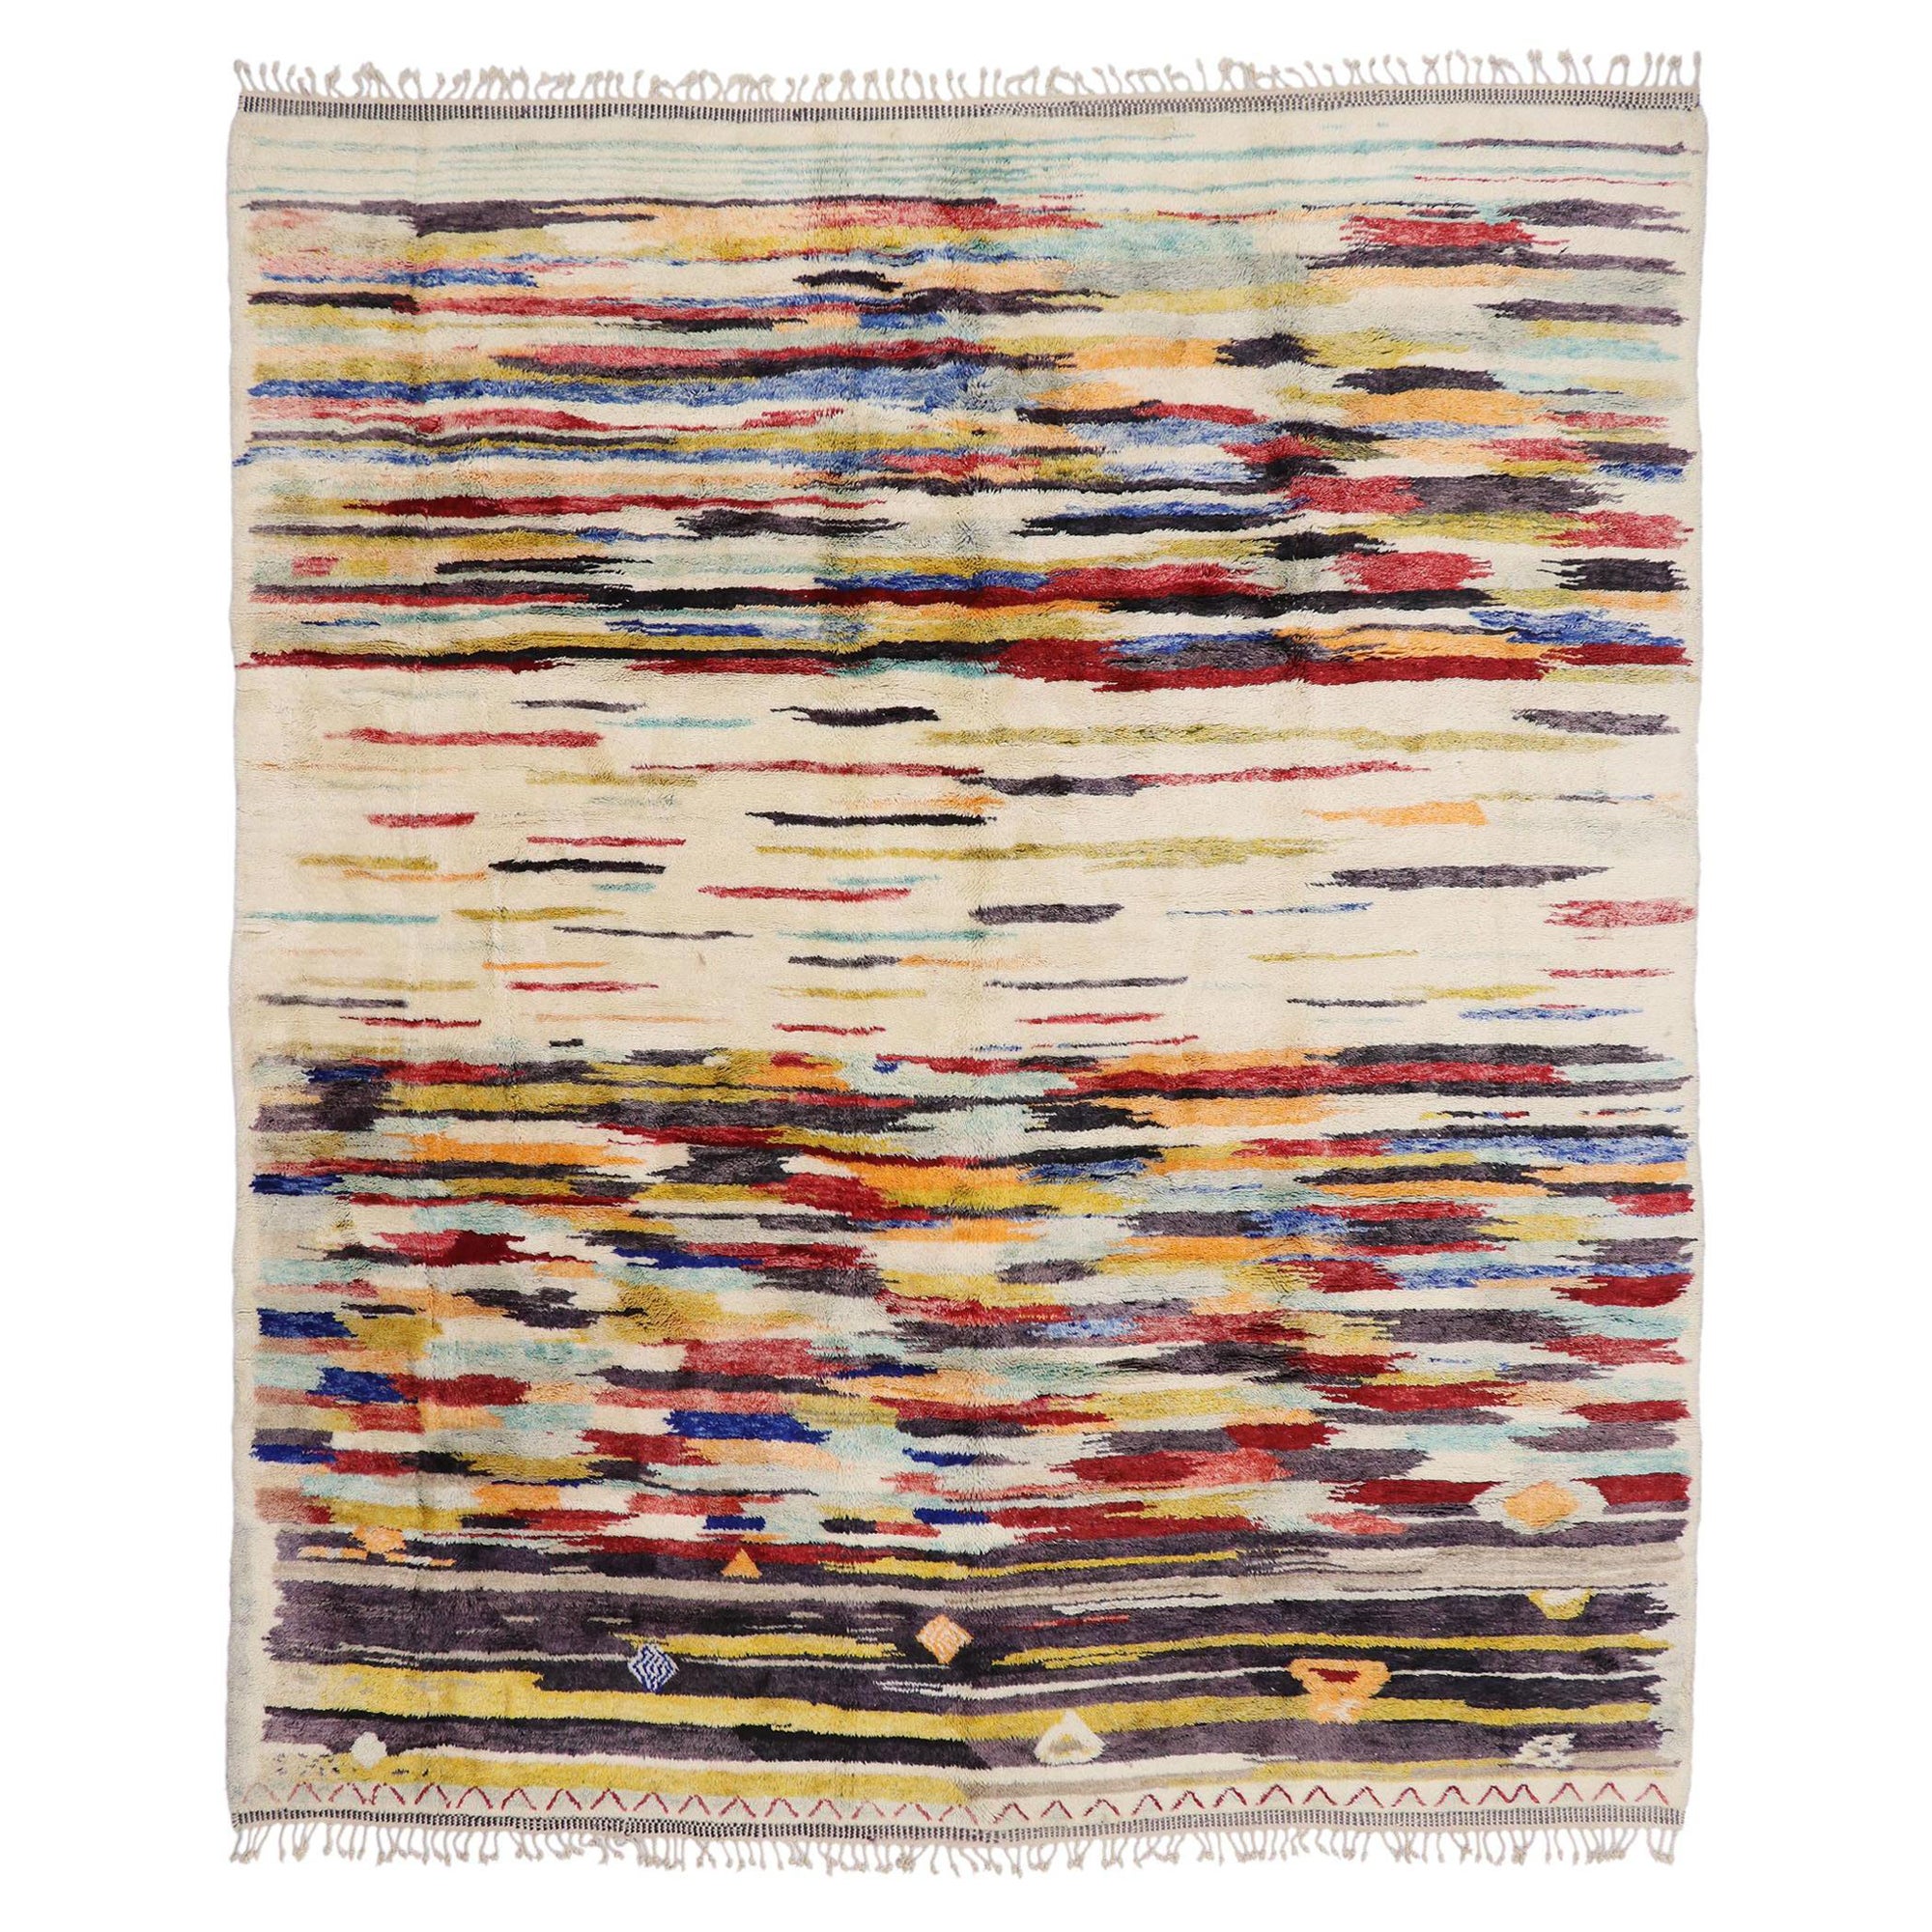 New Contemporary Berber Moroccan Rug Inspired by Sol LeWitt